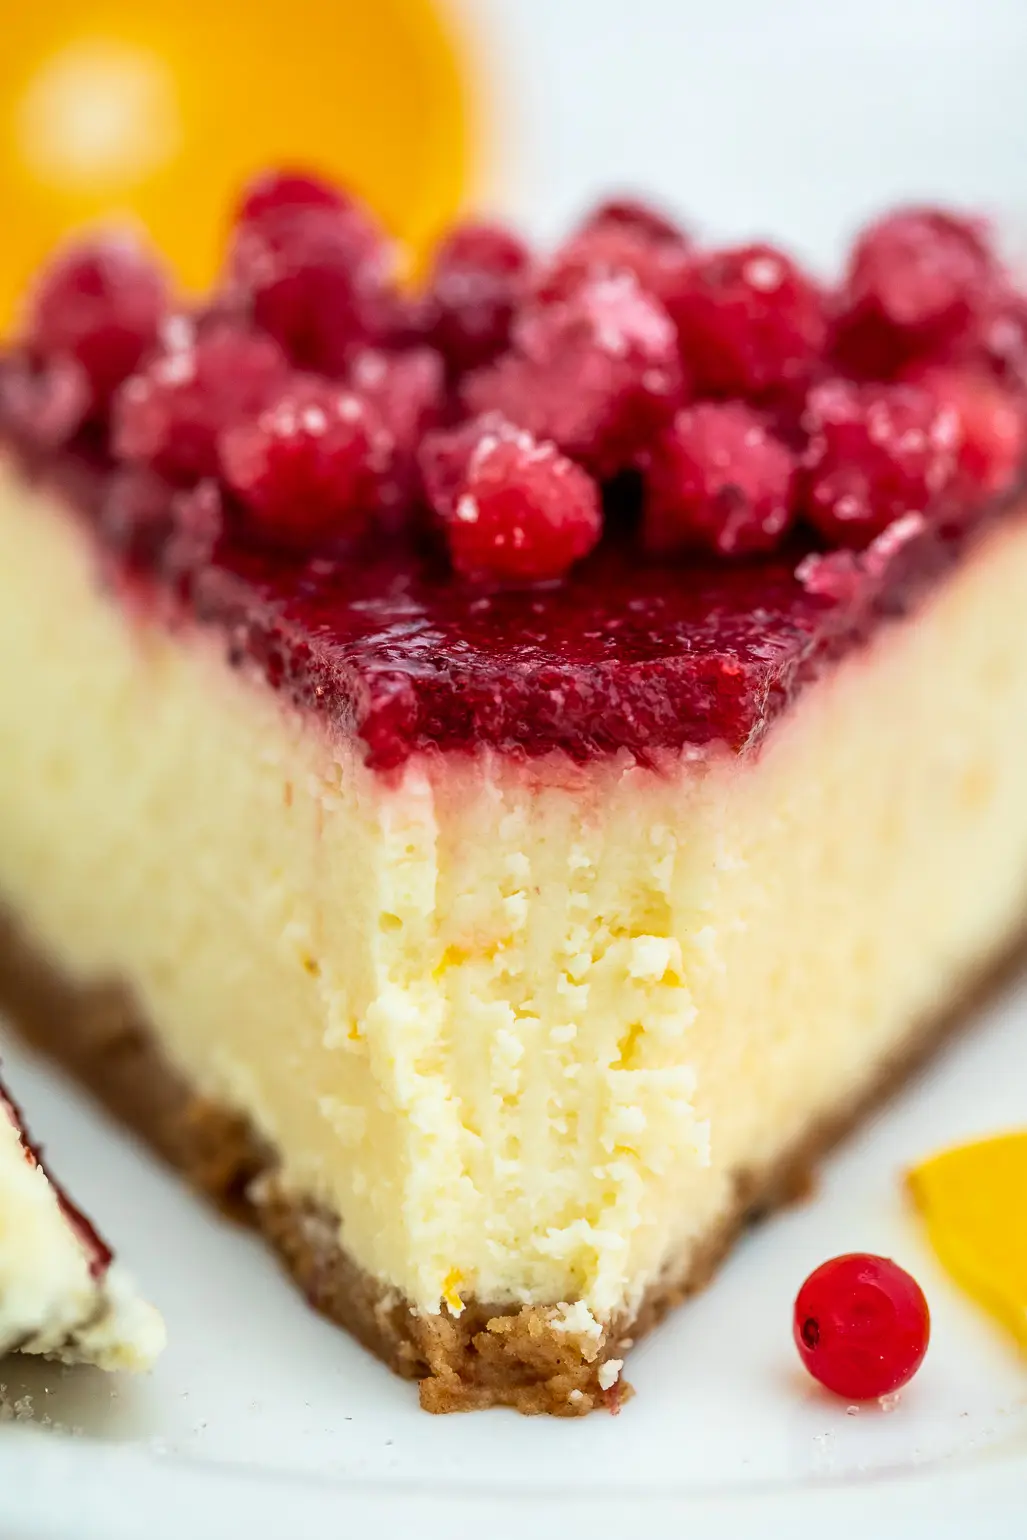 Cranberry Cheesecake Recipe [Video] - Sweet and Savory Meals